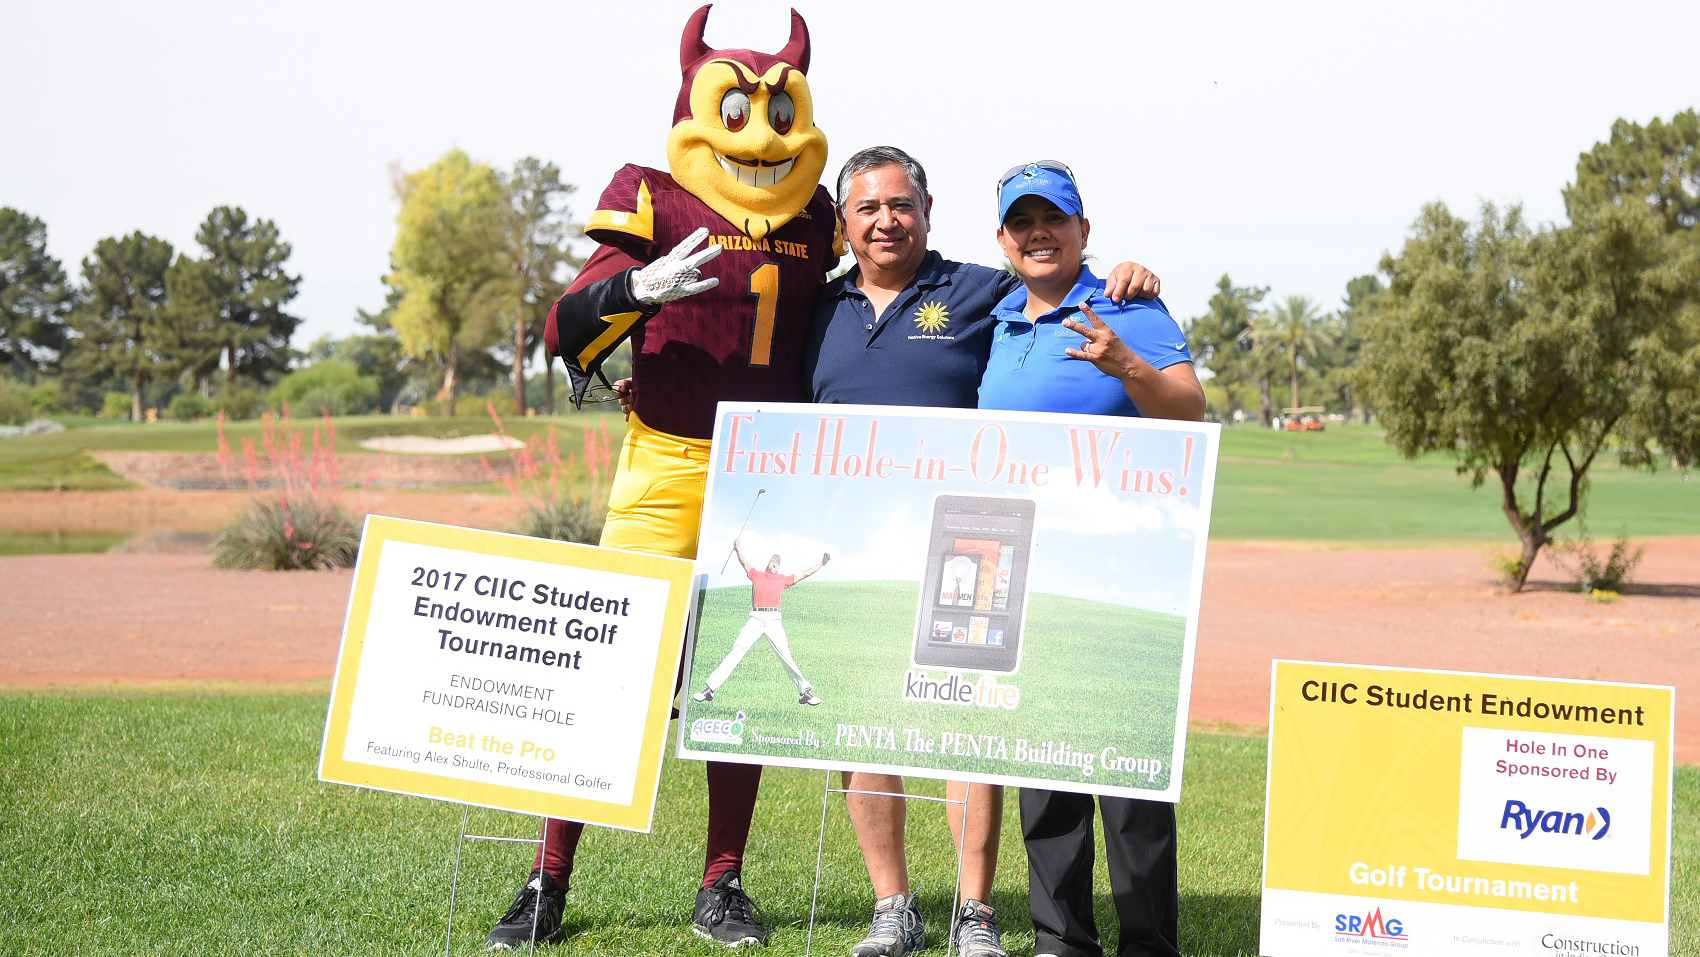 ASU's Sun Devil mascot, Sparky, stands with two sponsors at the CIIC Golf tournament